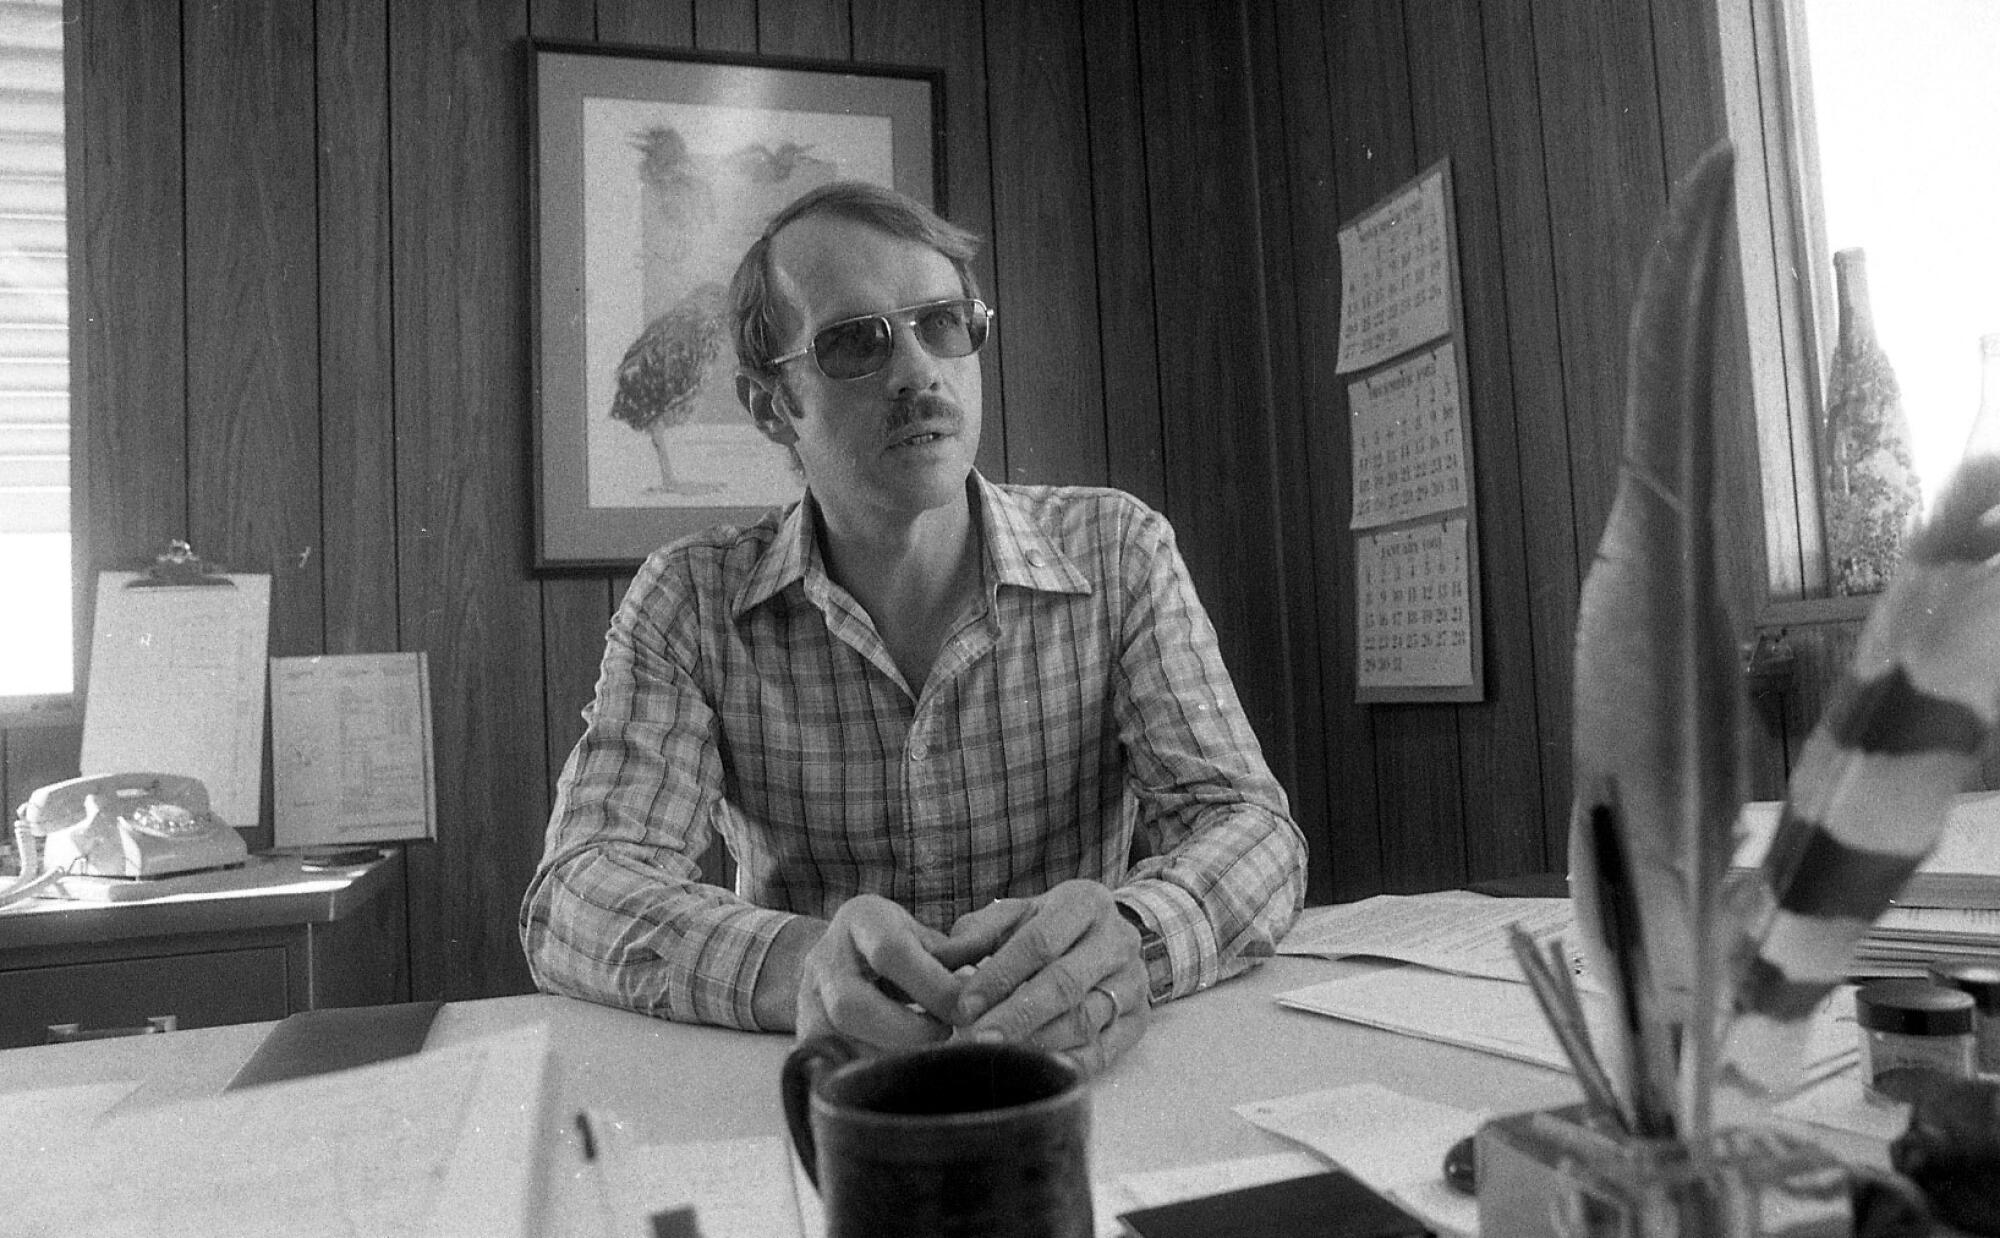 A scientist in a checkered shirt and sunglasses sits at a desk.